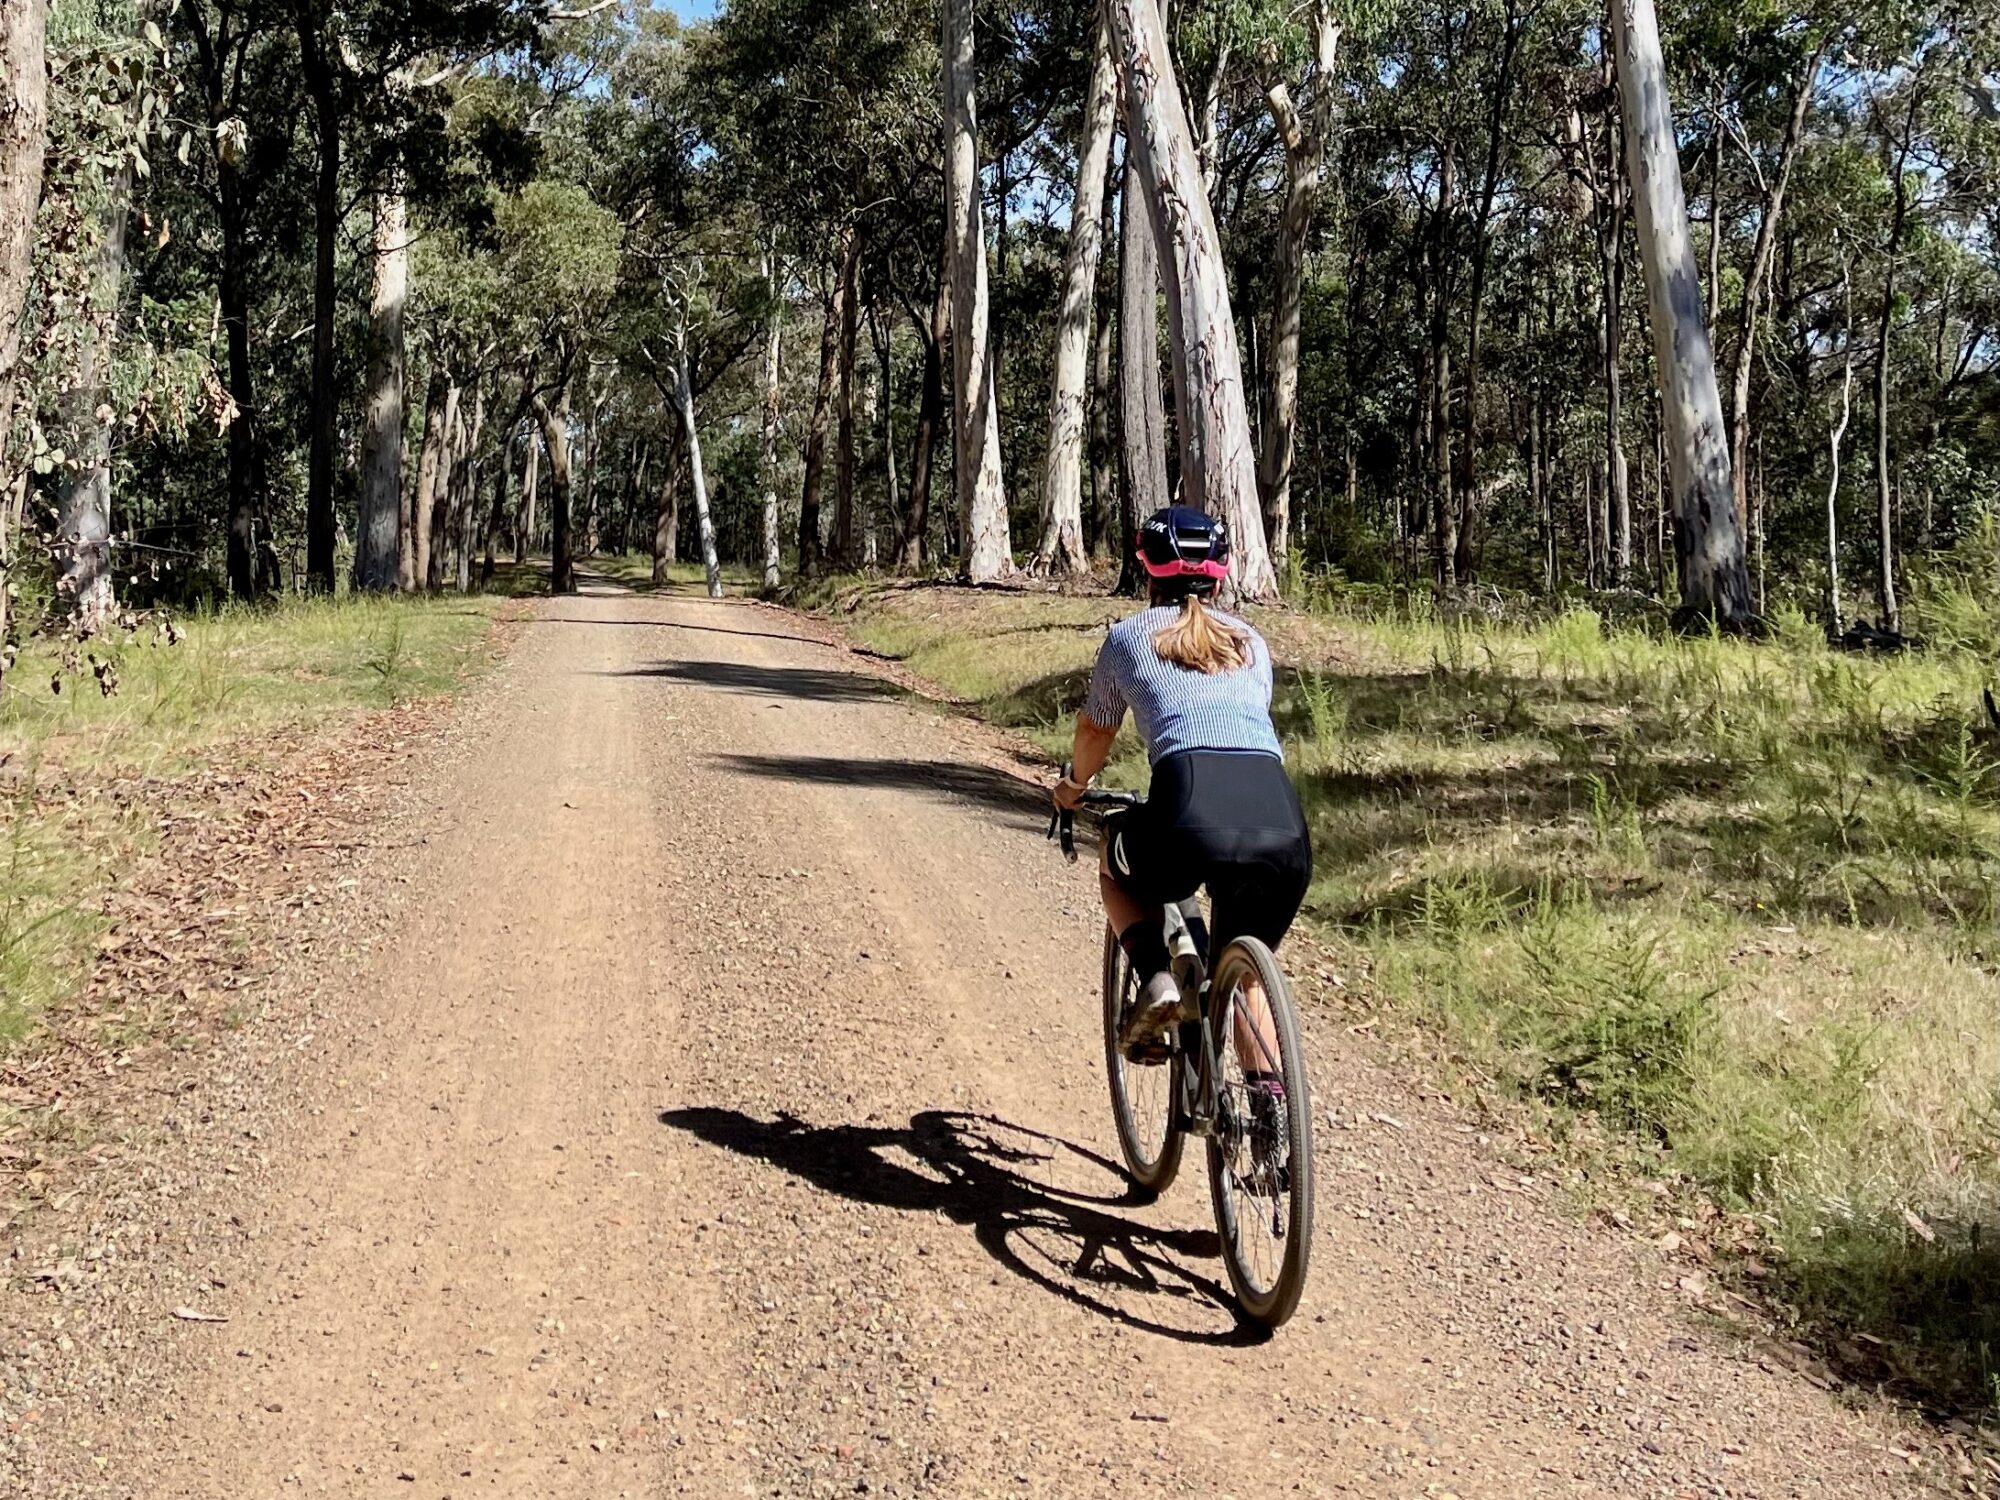 A female cyclist riding on a smooth gravel road through tall native trees on a sunny day